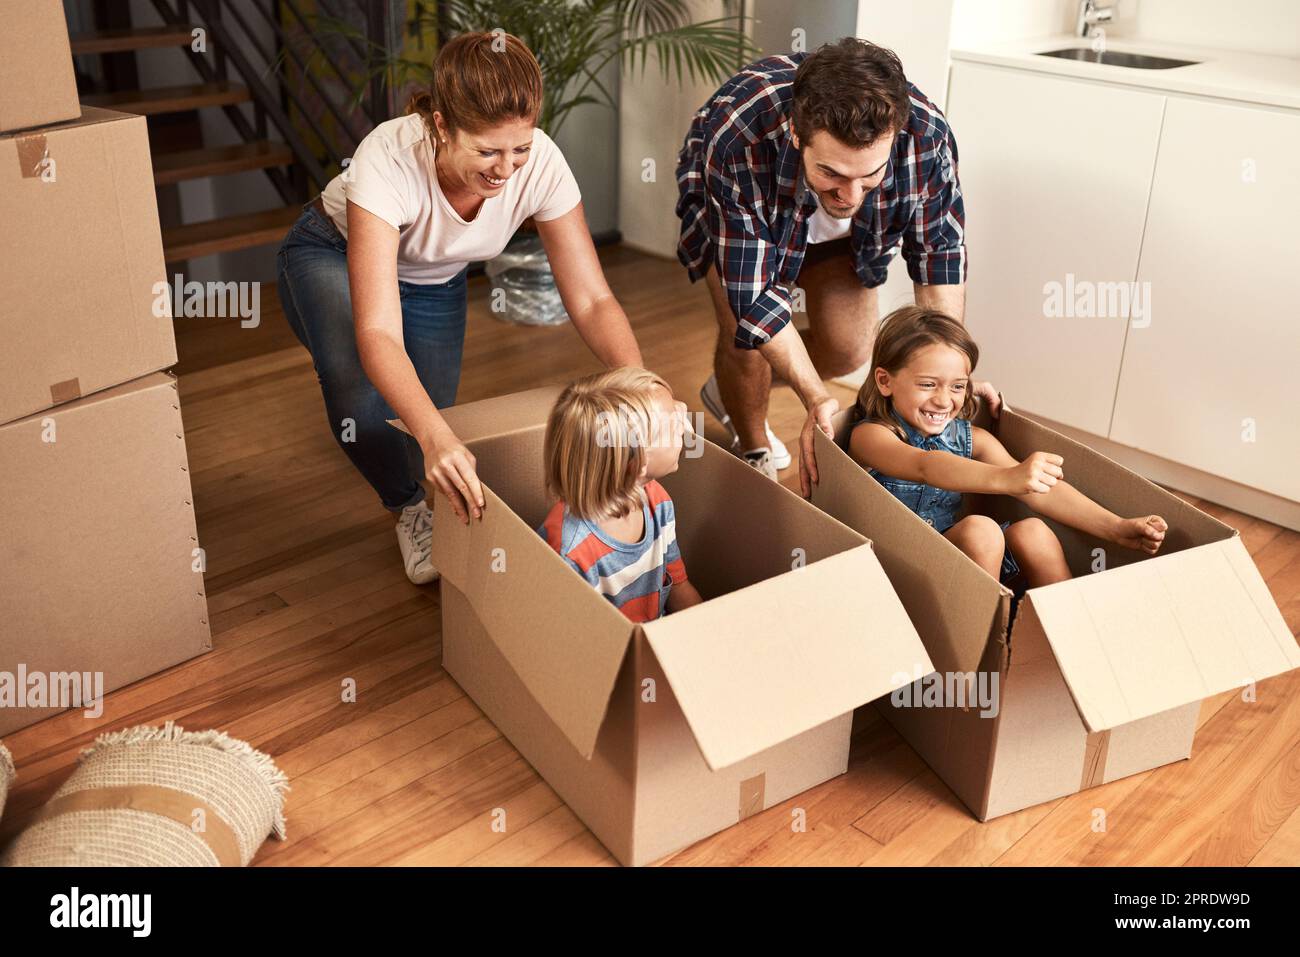 Having fun with the boxes. a young family on their moving day. Stock Photo